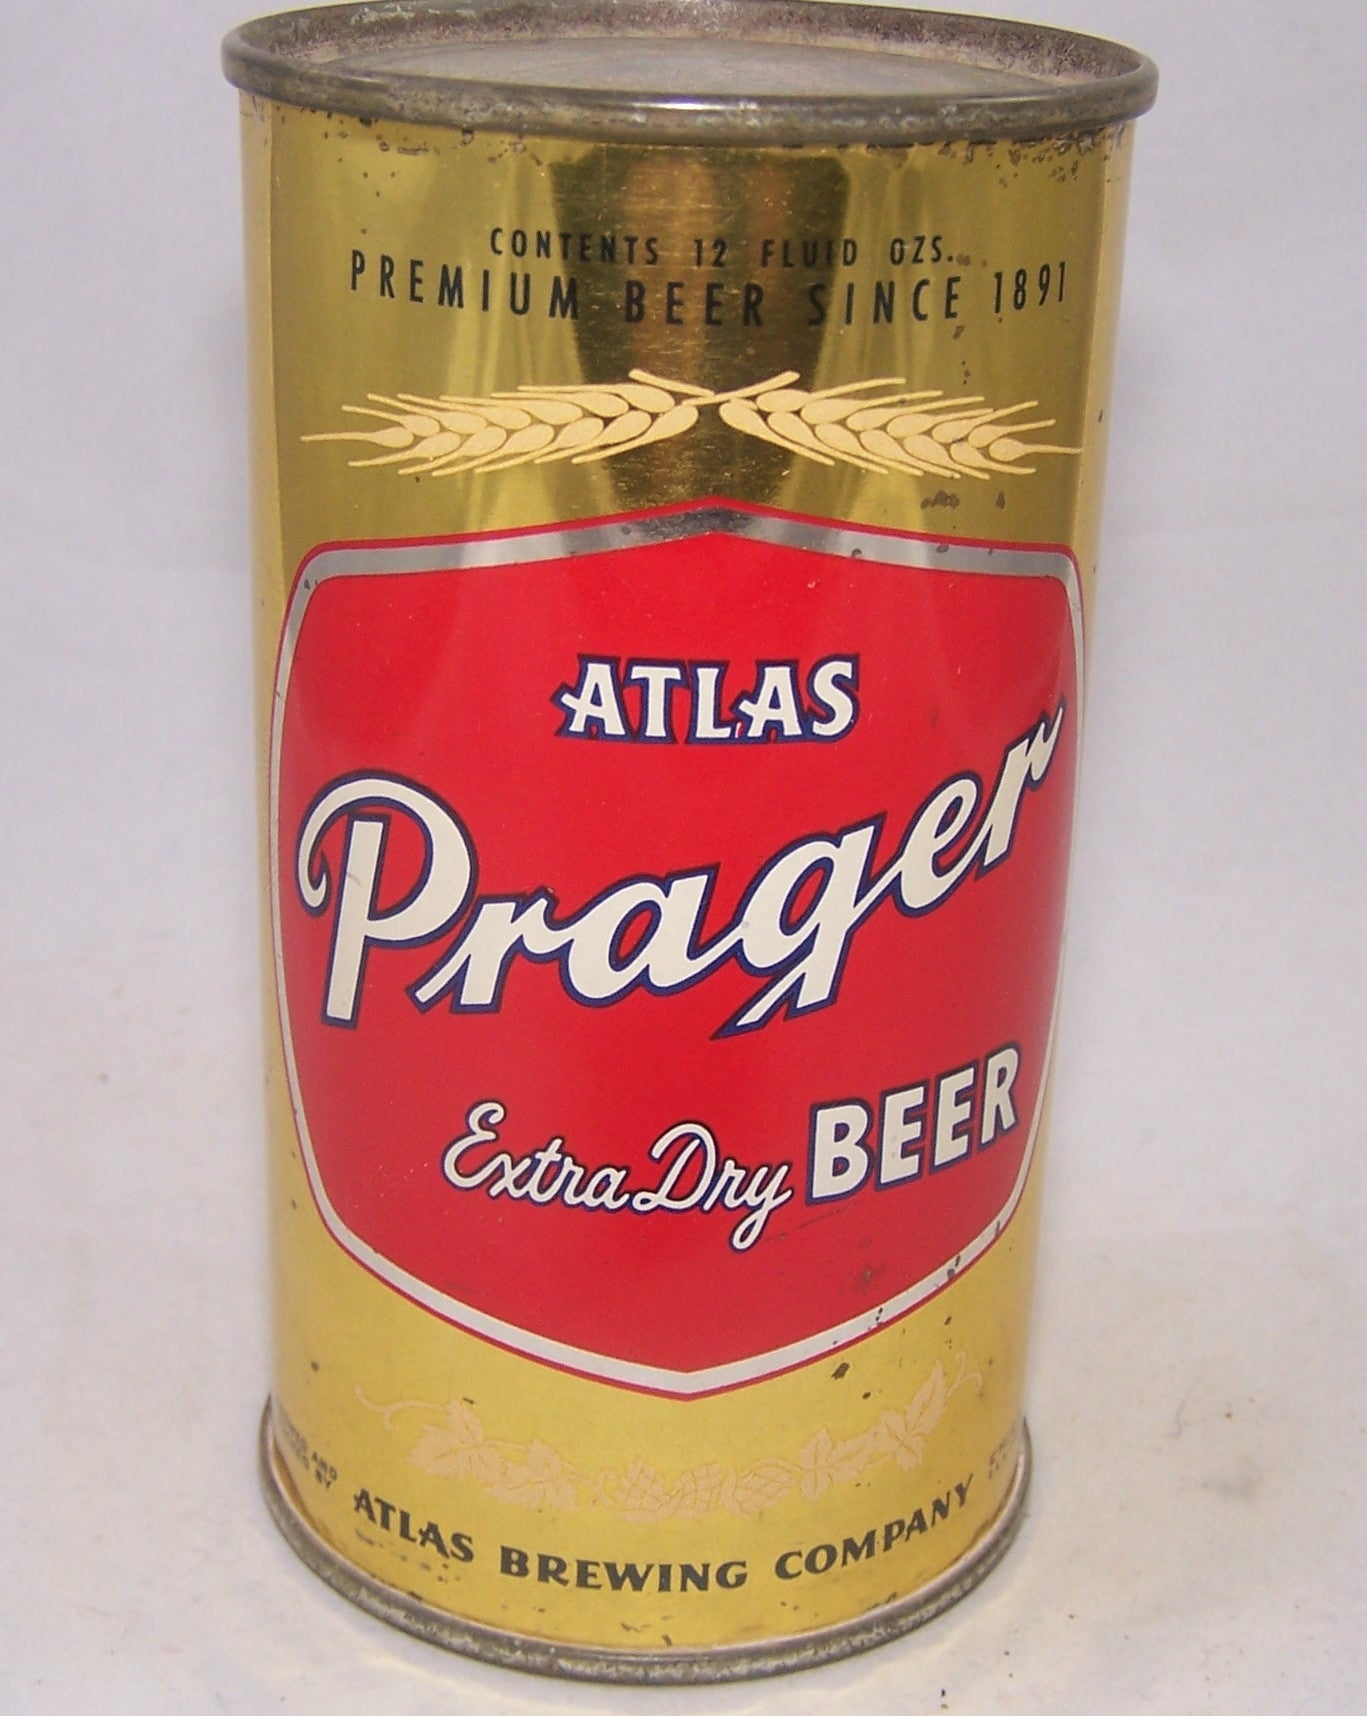 Atlas Prager Extra Dry Beer, USBC 32-23, Grade 1 (Underrated Can) Sold on 07/03/17